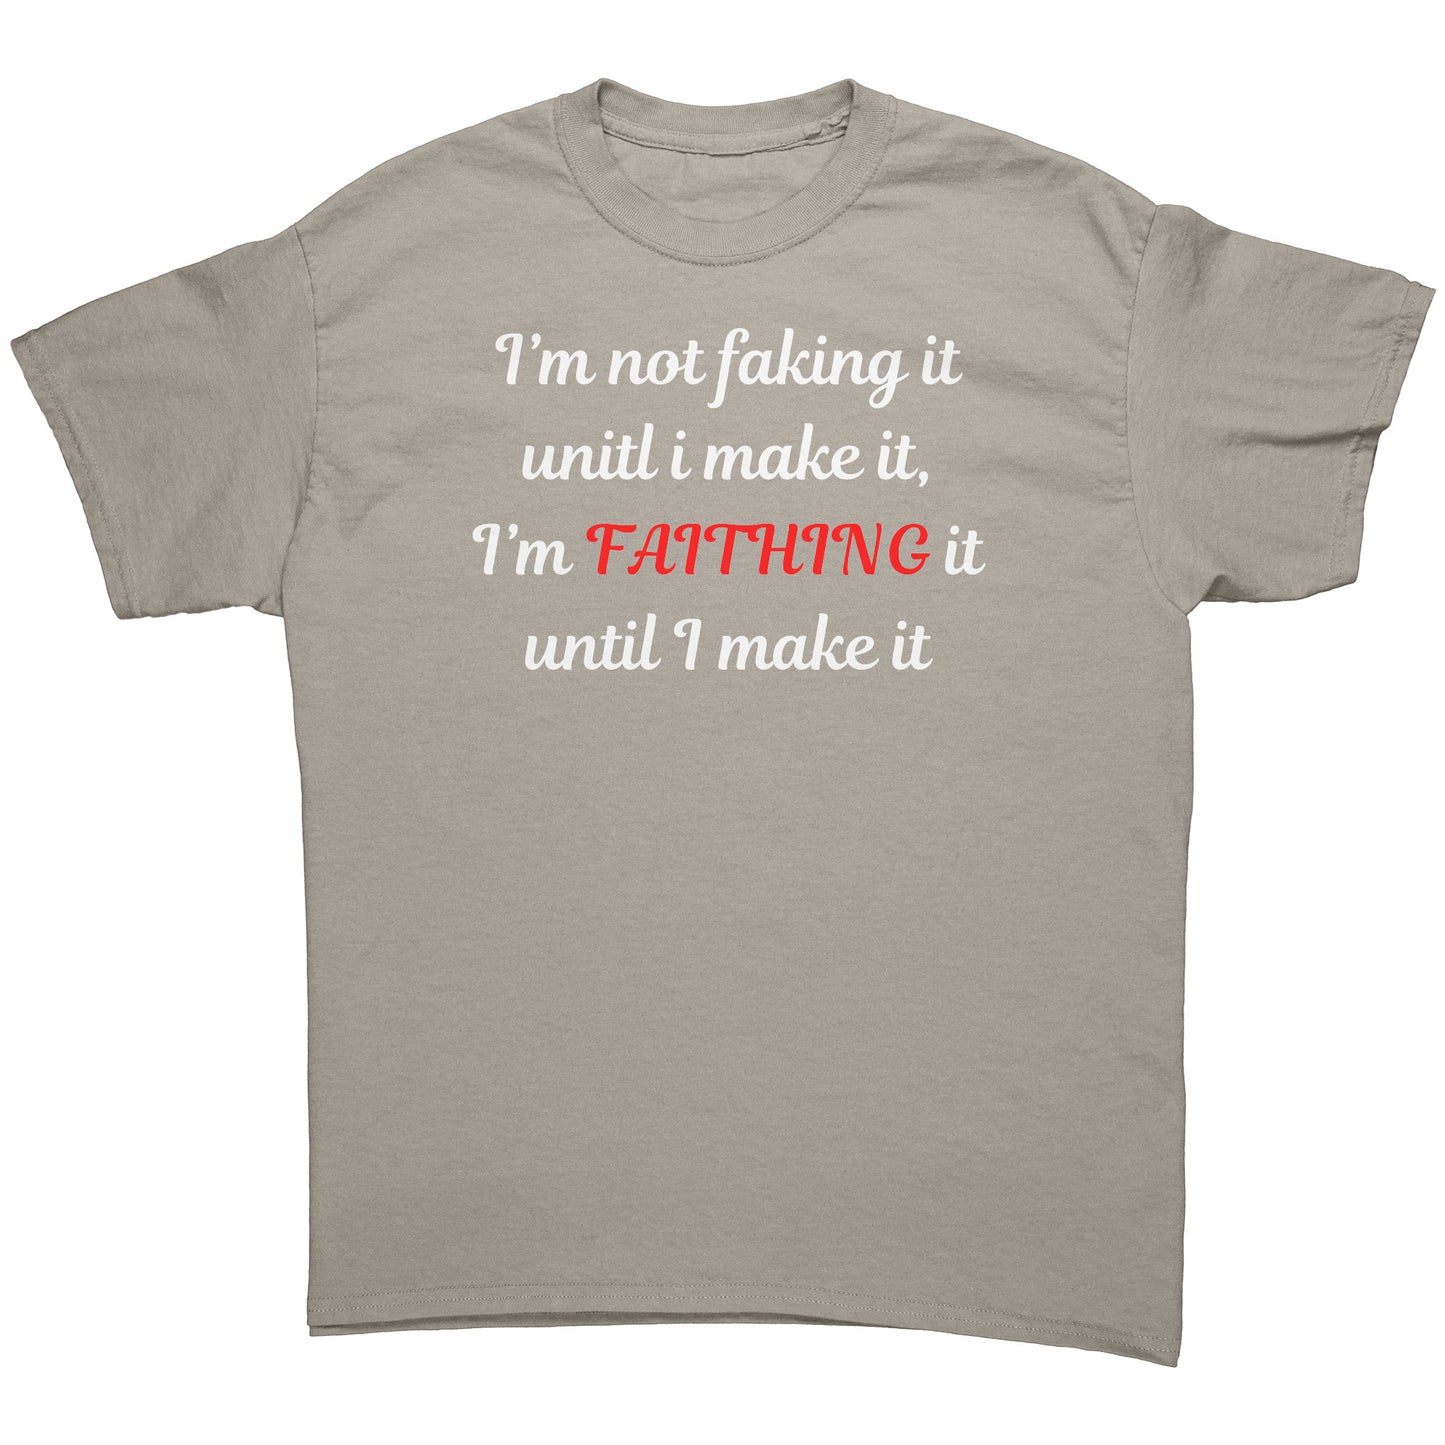 I'm not faking it Tee White lettering